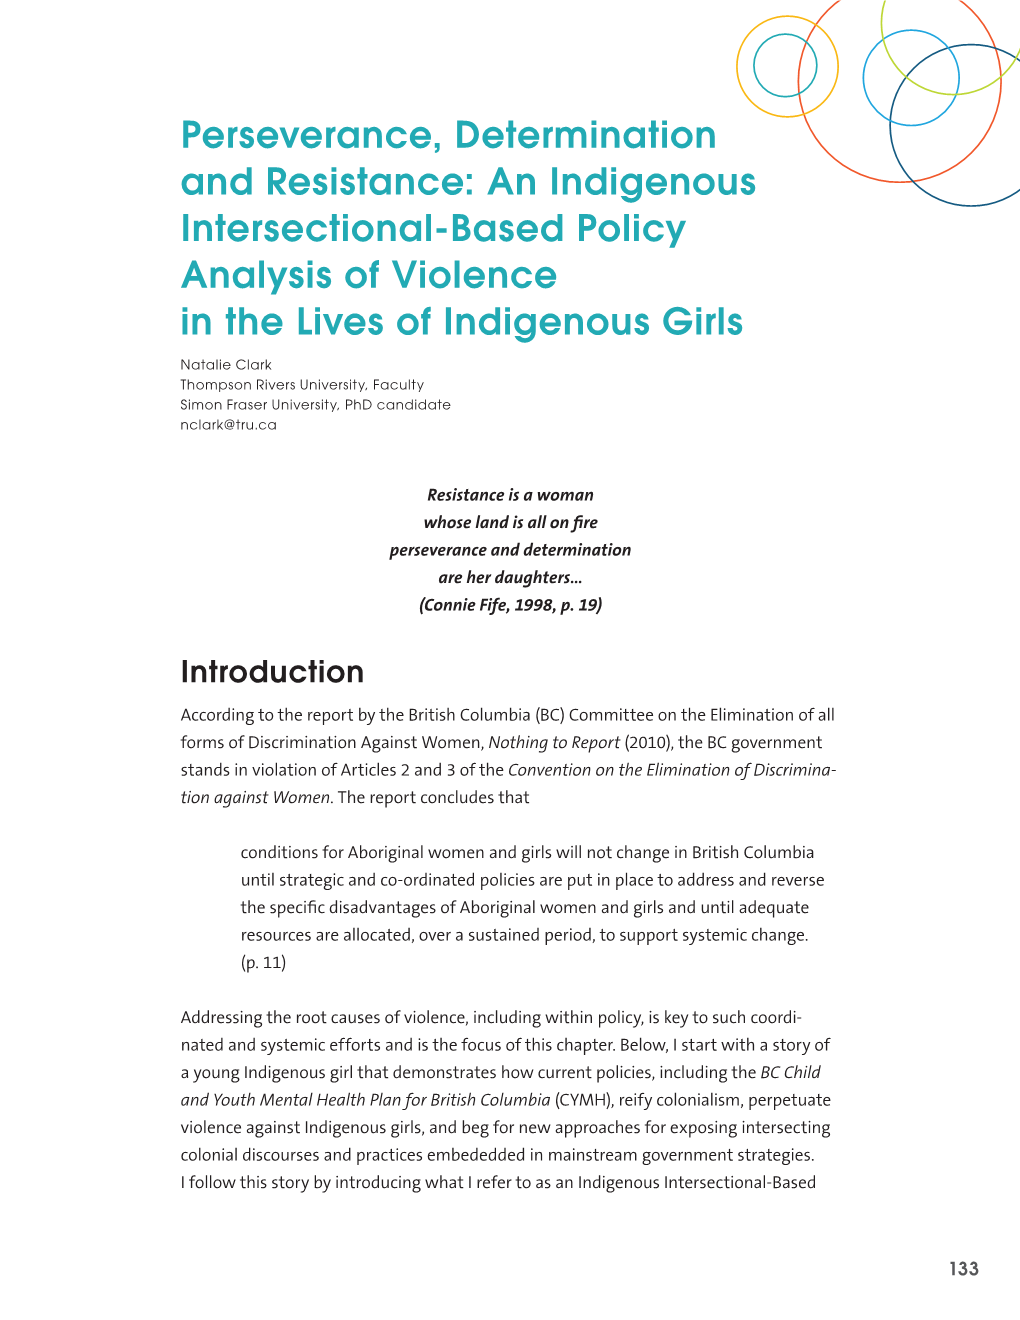 An Indigenous Intersectional-Based Policy Analysis of Violence in the Lives of Indigenous Girls